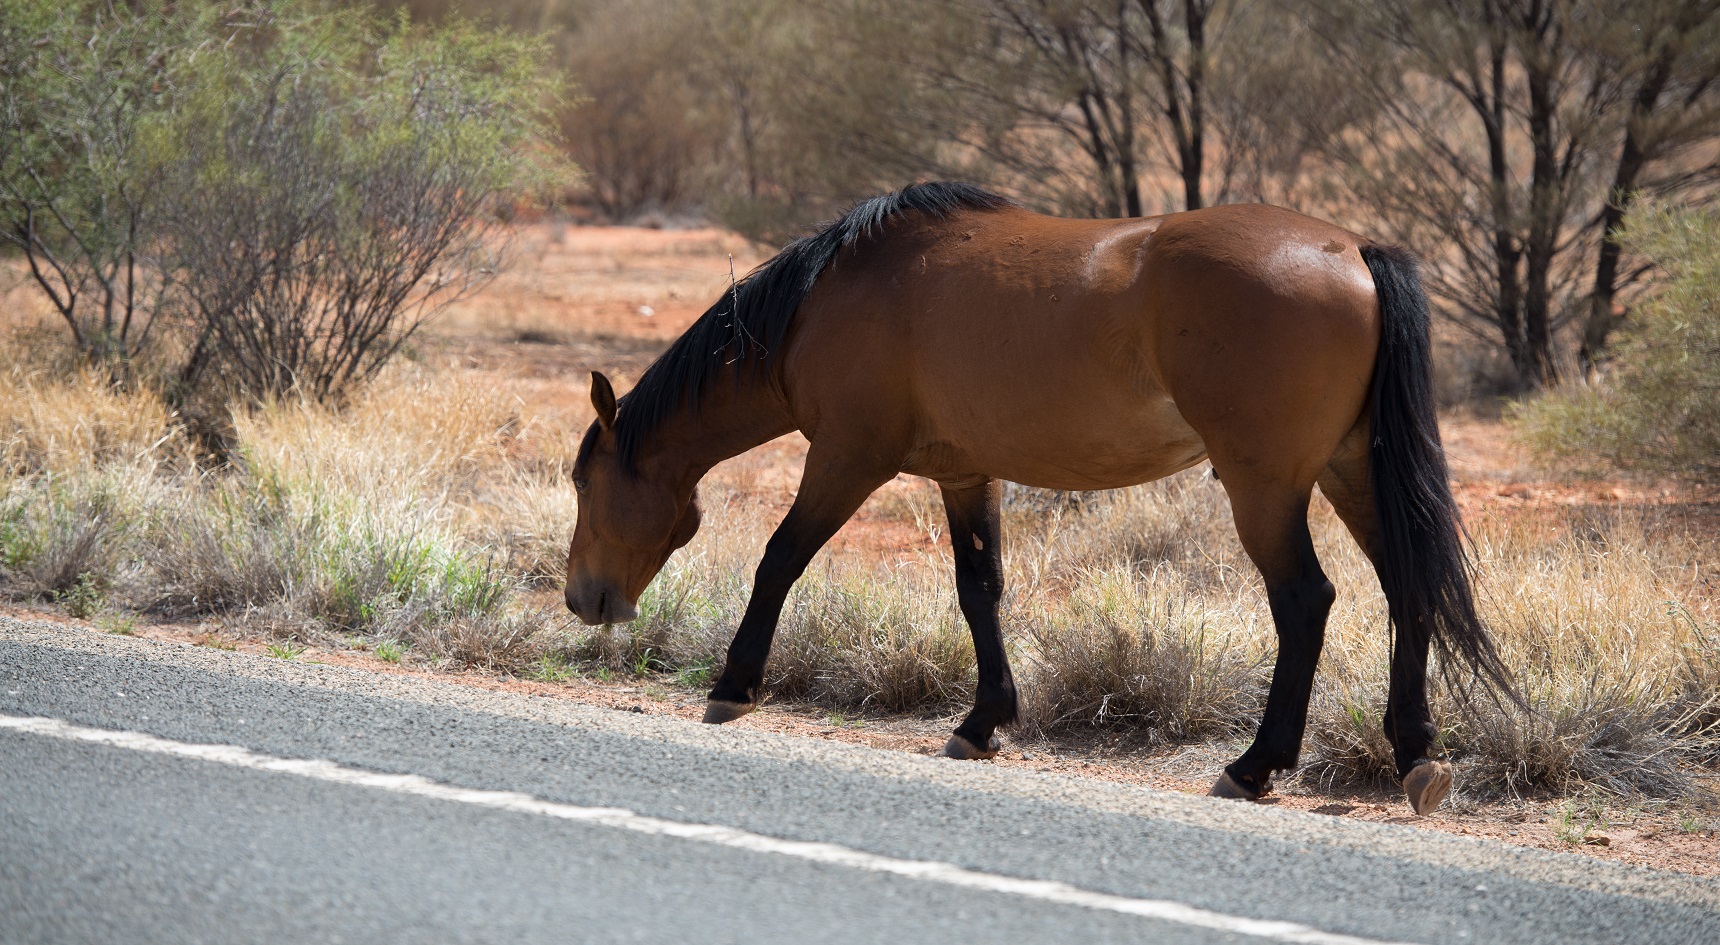 Wild horse walking along outback road.